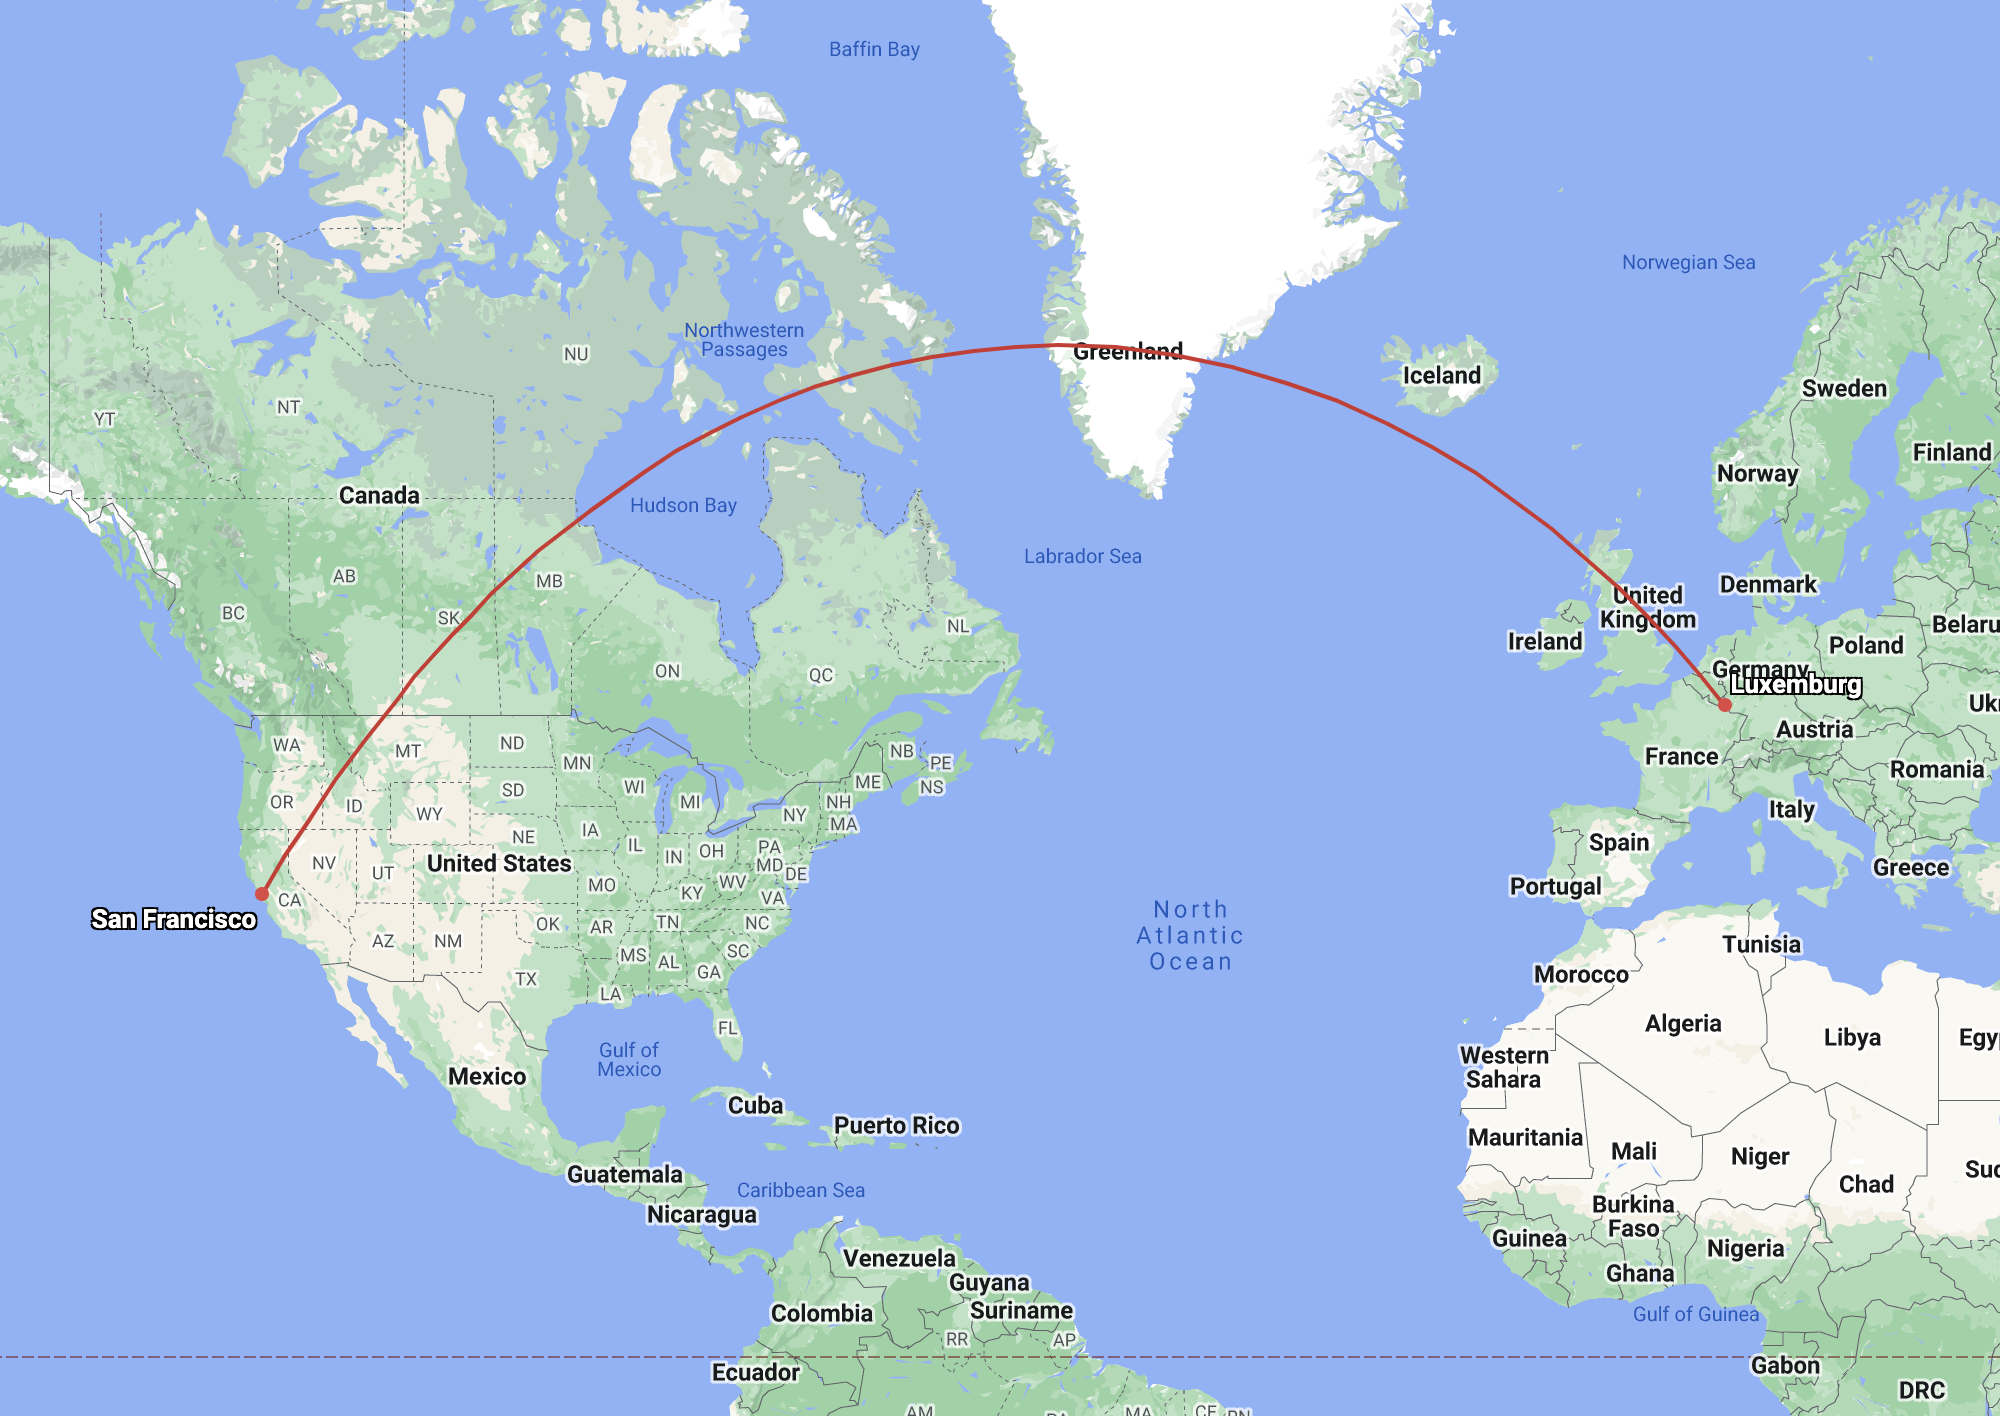 The same line plotted on a Mercator map. The line has the shape of an arc.